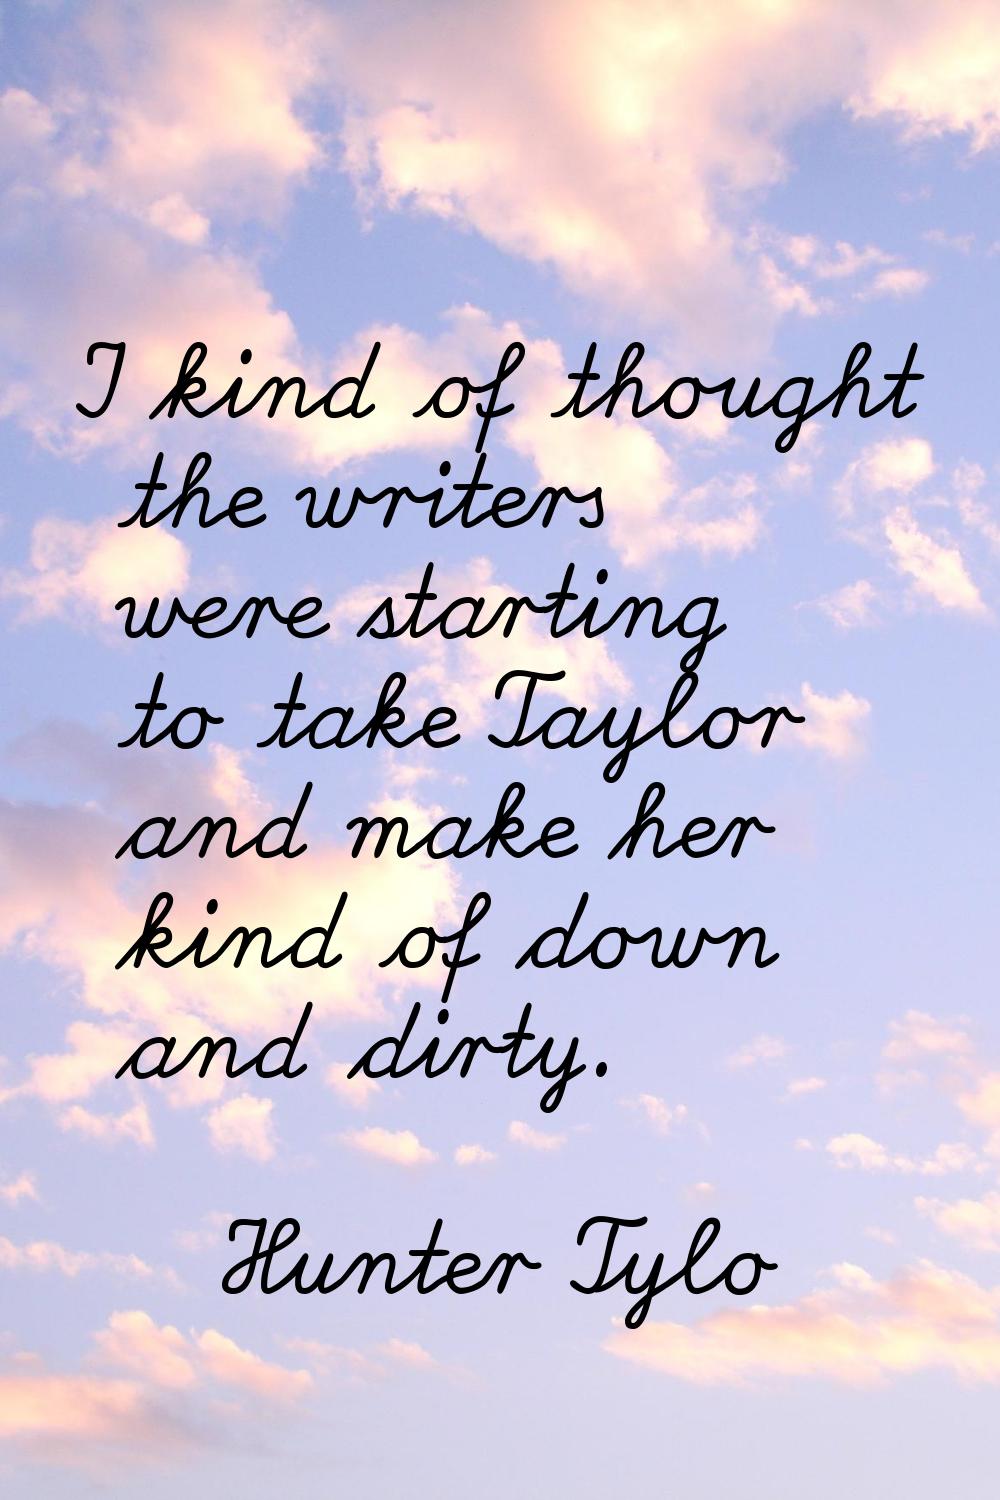 I kind of thought the writers were starting to take Taylor and make her kind of down and dirty.